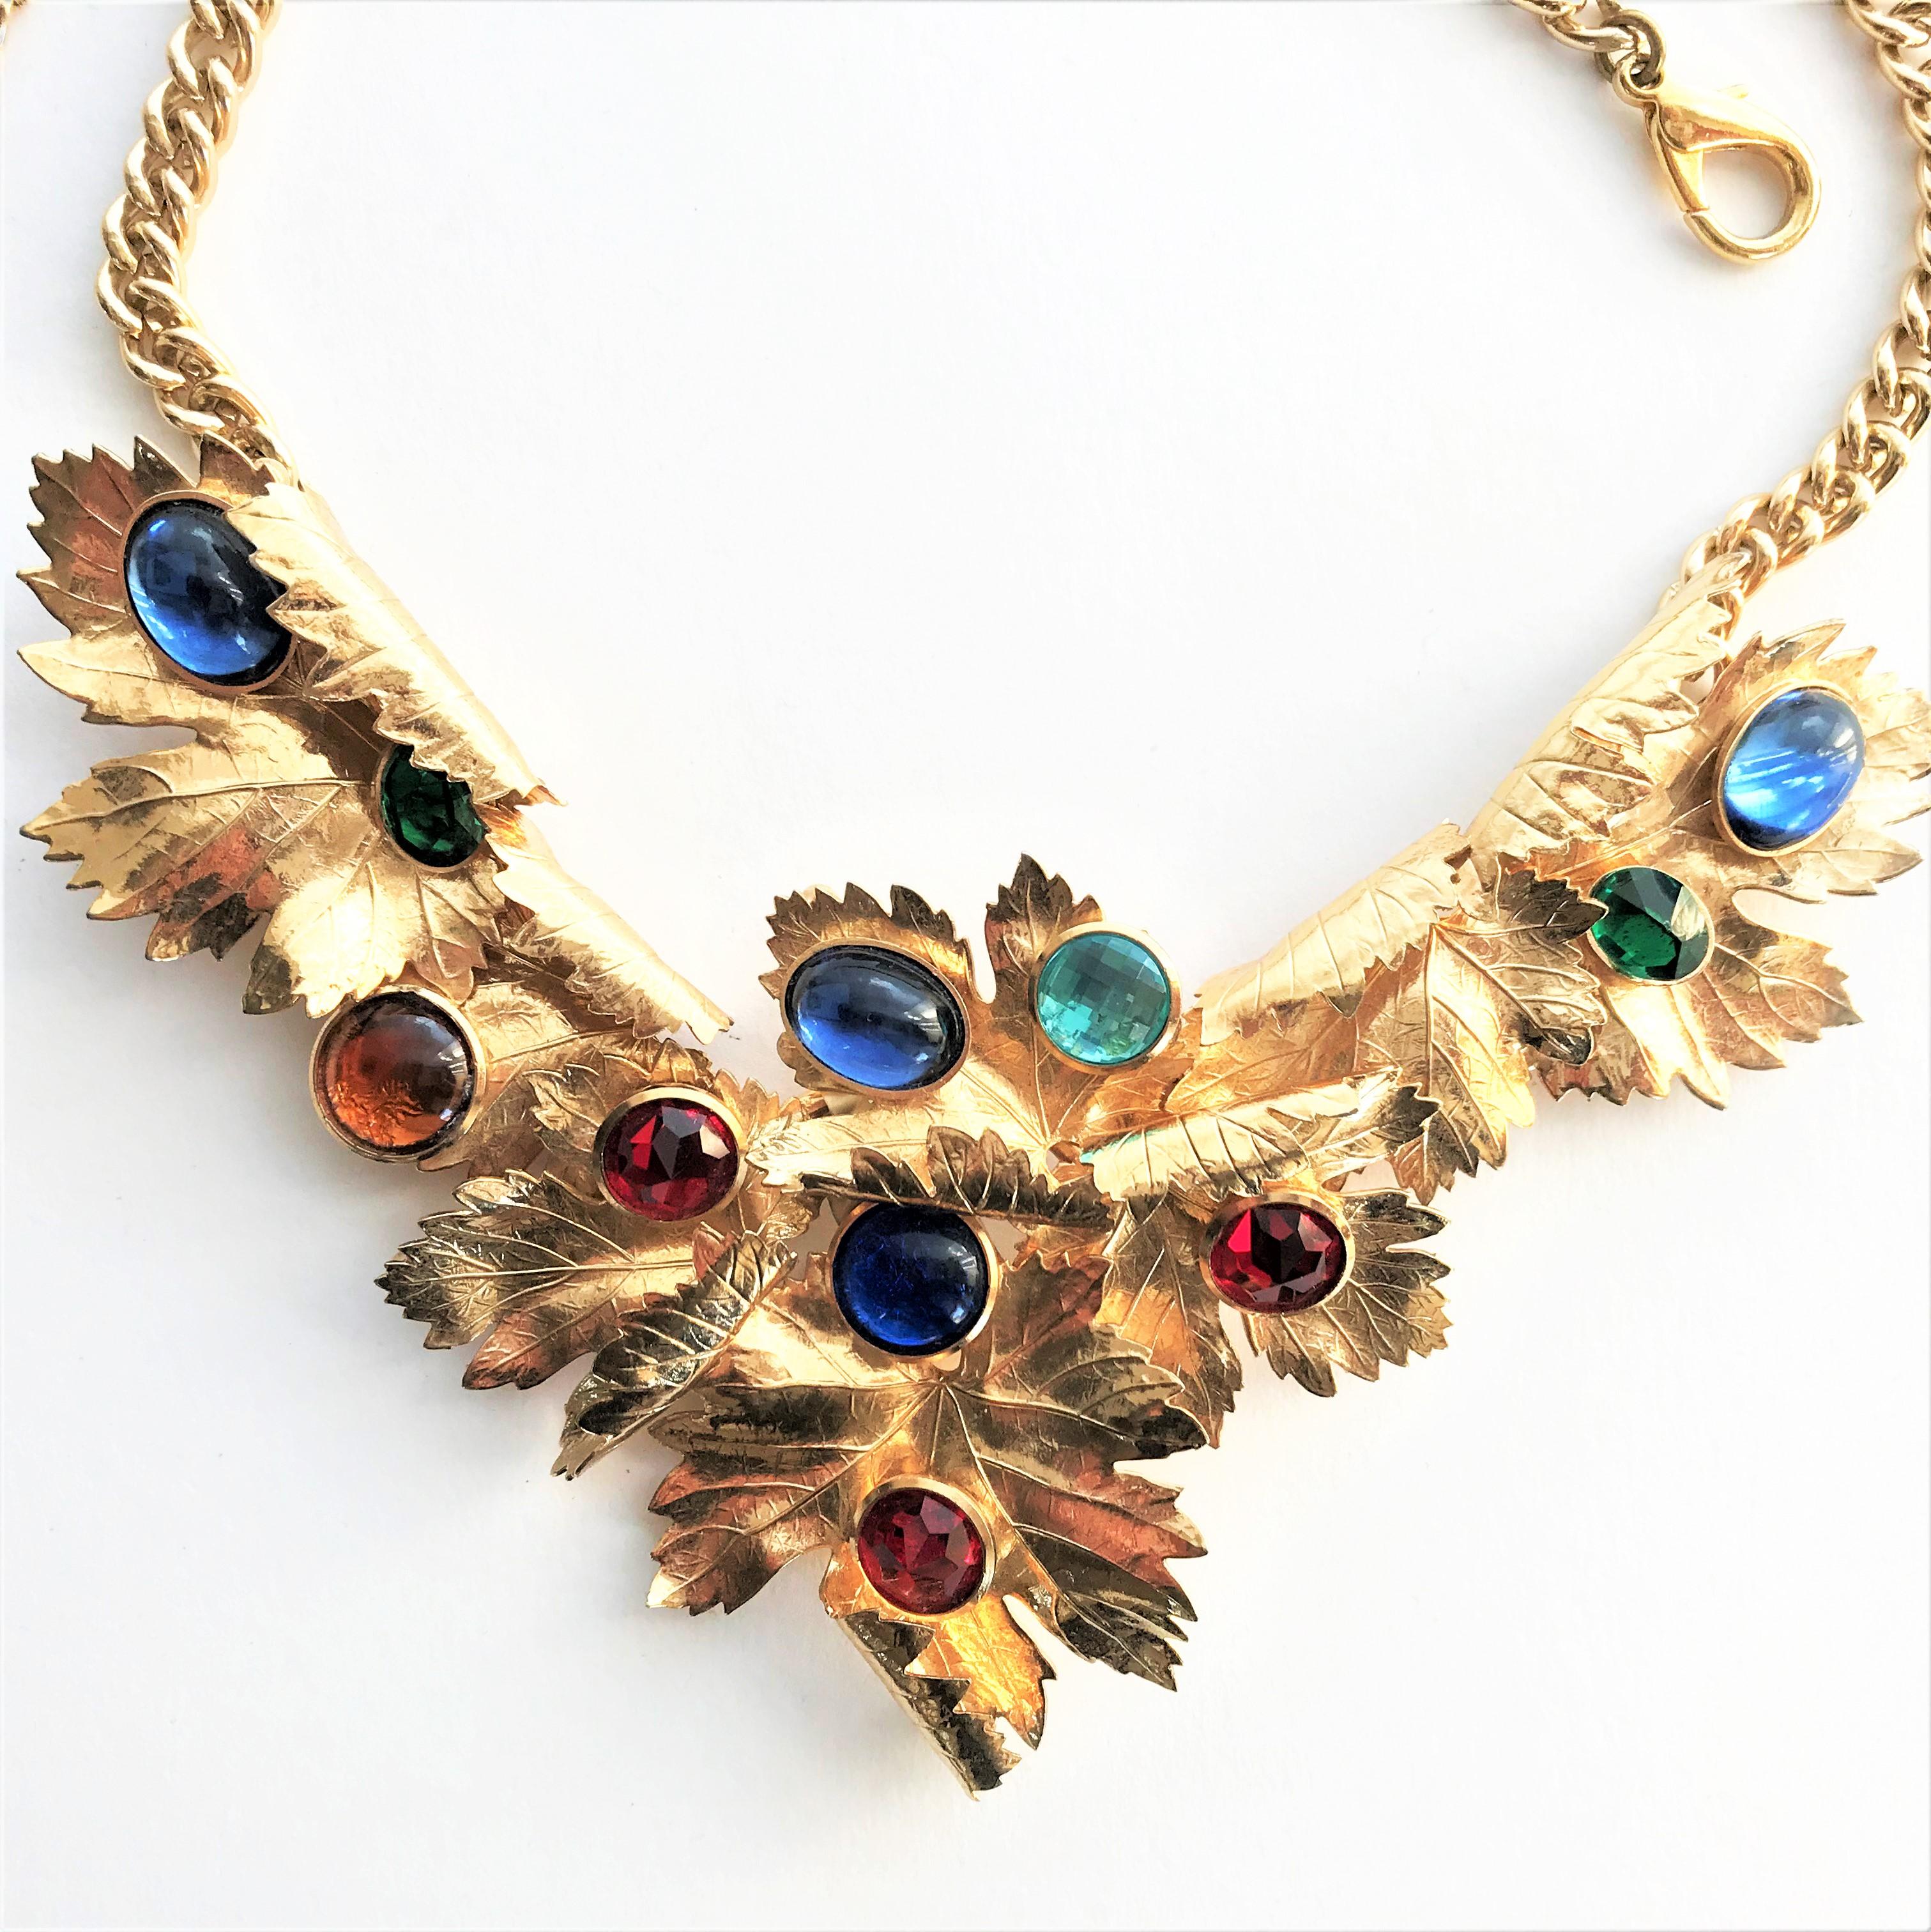 About
Very interesting, beautiful Christian Dior necklace consisting of 7 maple leaves, each set with a set of rhinestones. Some of the stones are cut or round. Each leaf is rolled up on one side and the leaf veins are nicely .
Measurements:
Width